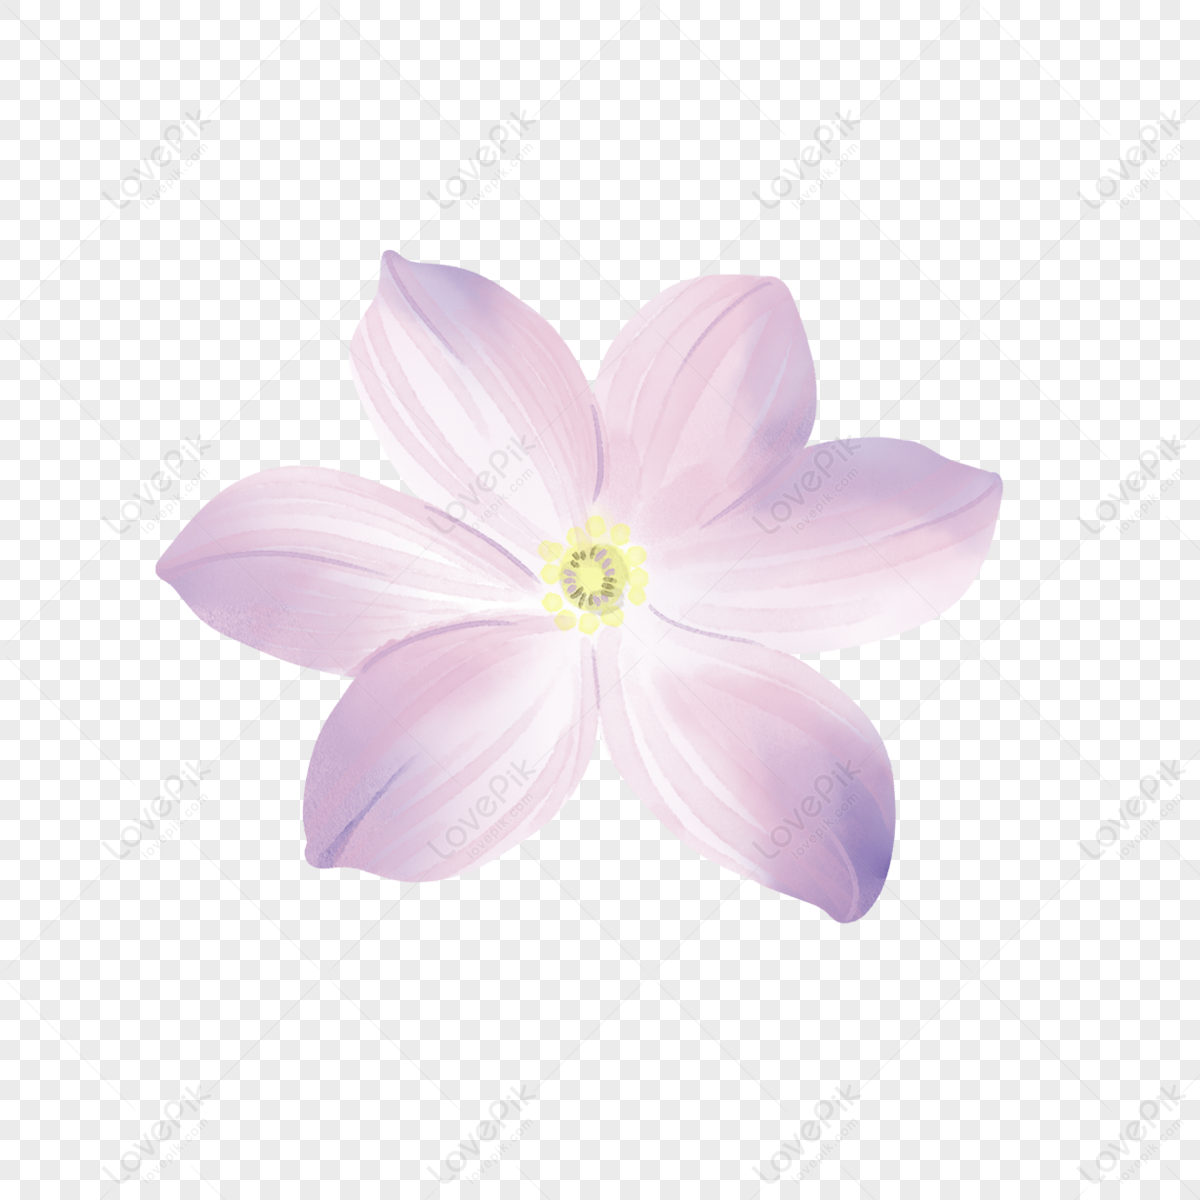 Spring Flower Pattern PNG Images With Transparent Background | Free ...